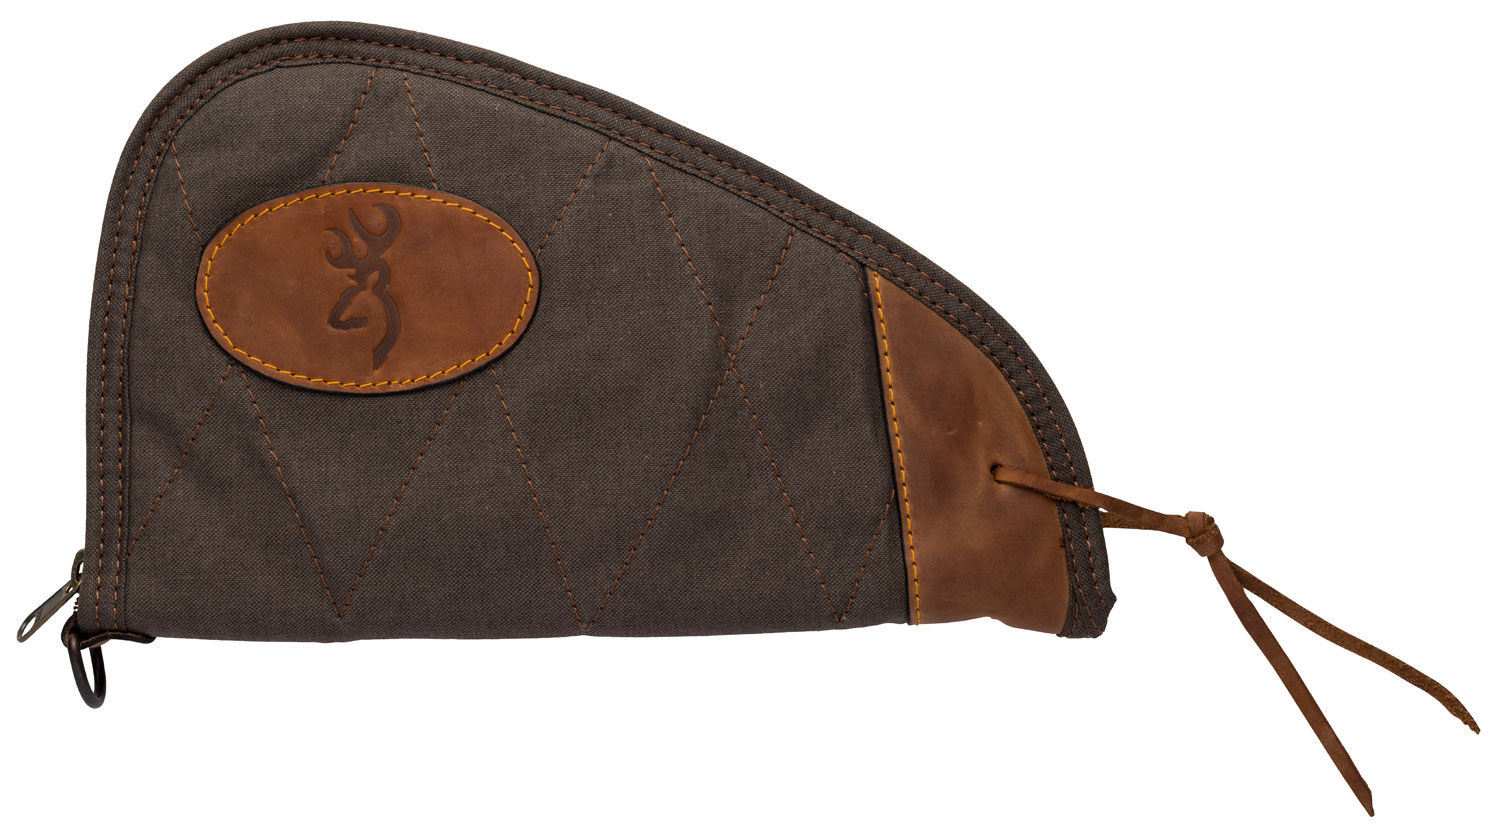 Browning 1423886911 Lona Pistol Rug made of Canvas with Flint Finish & Brown Leather Trim, Closed-Cell Foam Padding, Felt Lining & Zipper 11